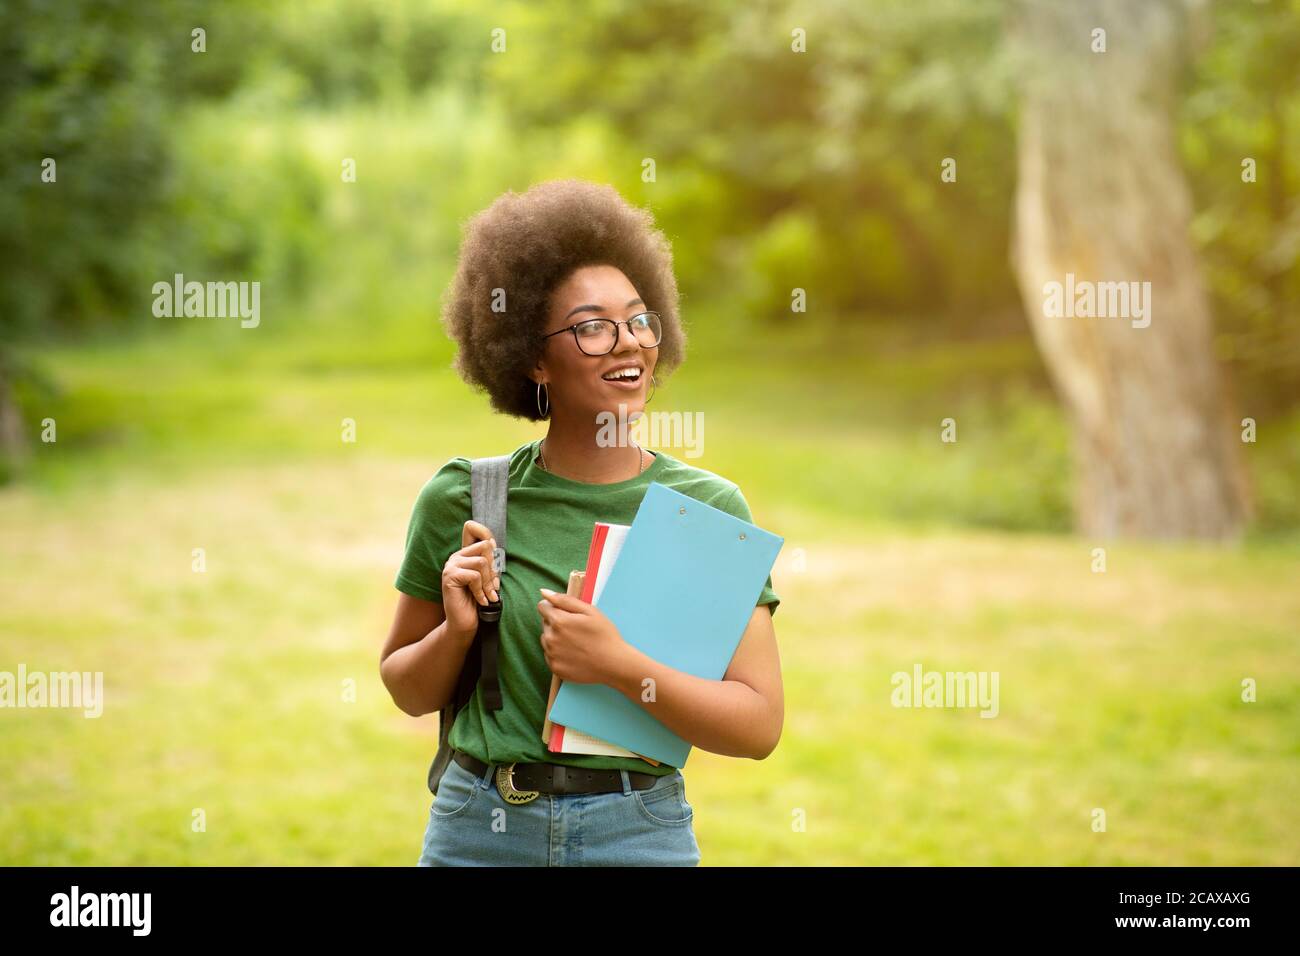 Black millennial student girl with backpack and workbooks posing outdoors at campus Stock Photo